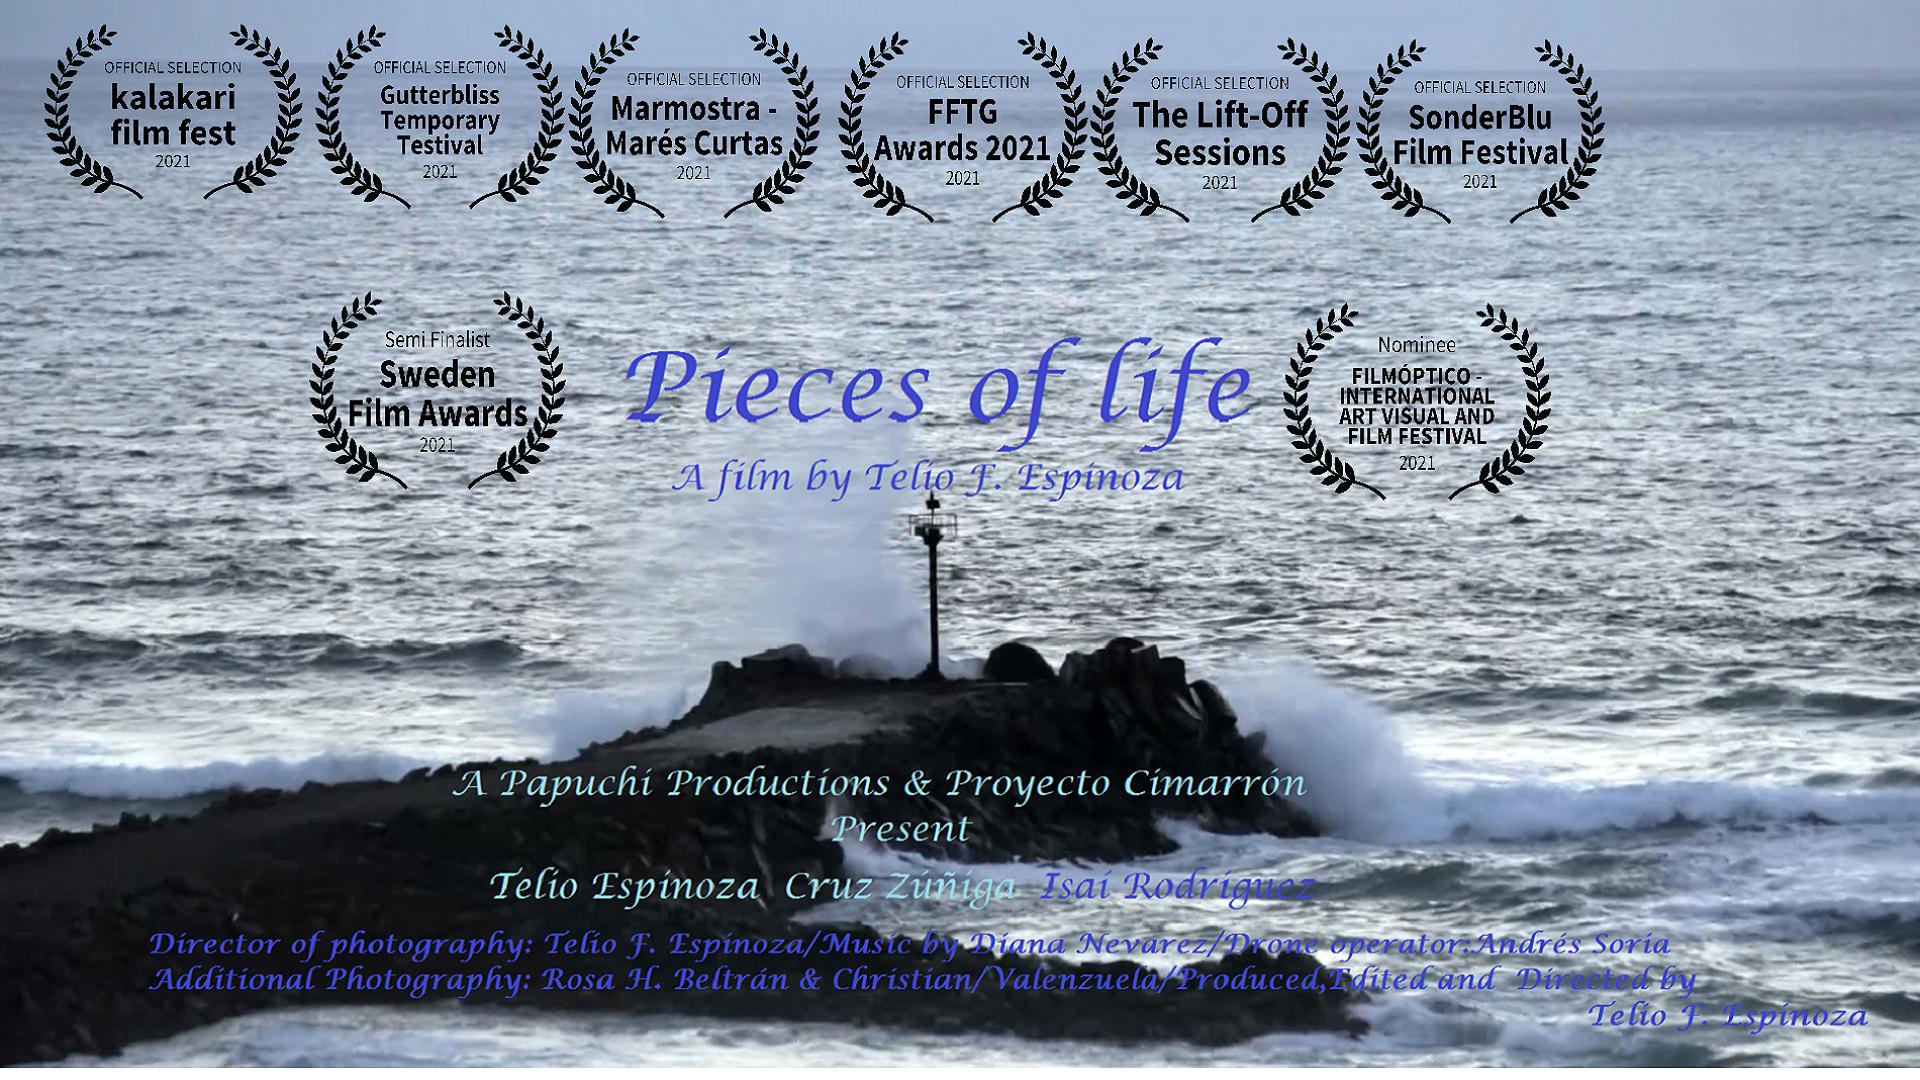 Pieces of life